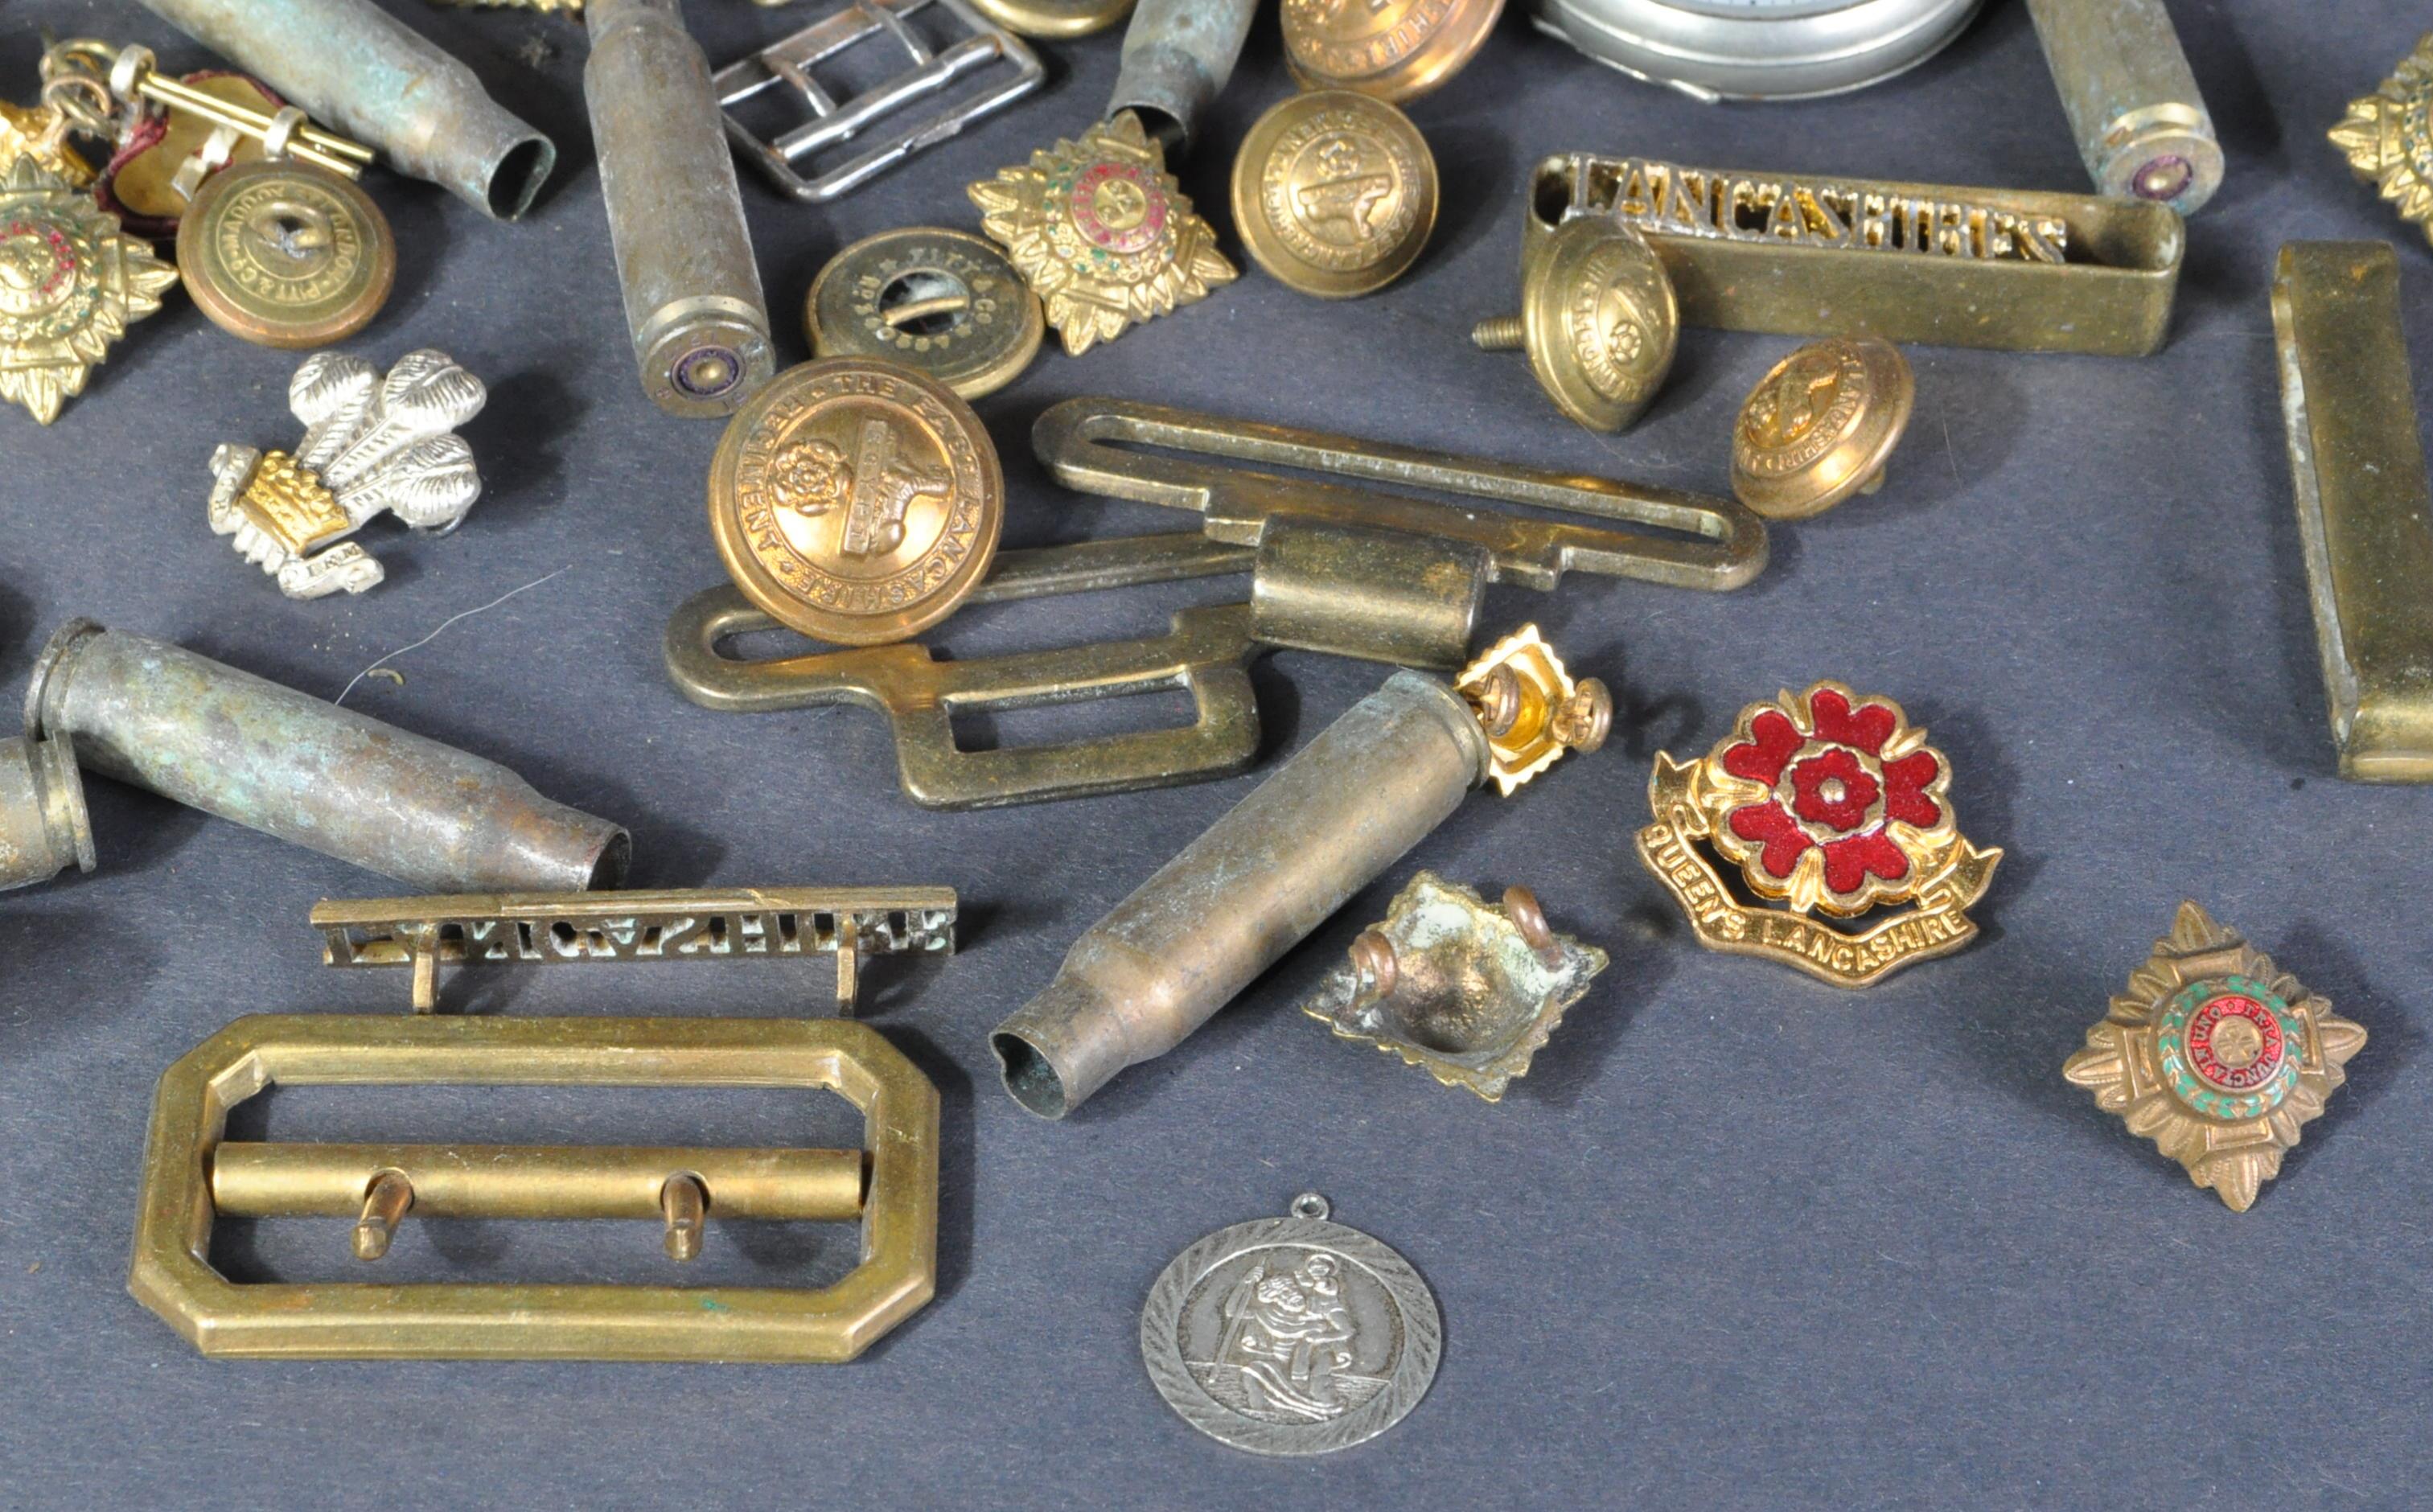 COLLECTION OF ASSORTED MILITARY RELATED ITEMS - BUTTONS, BADGES ETC - Image 5 of 6